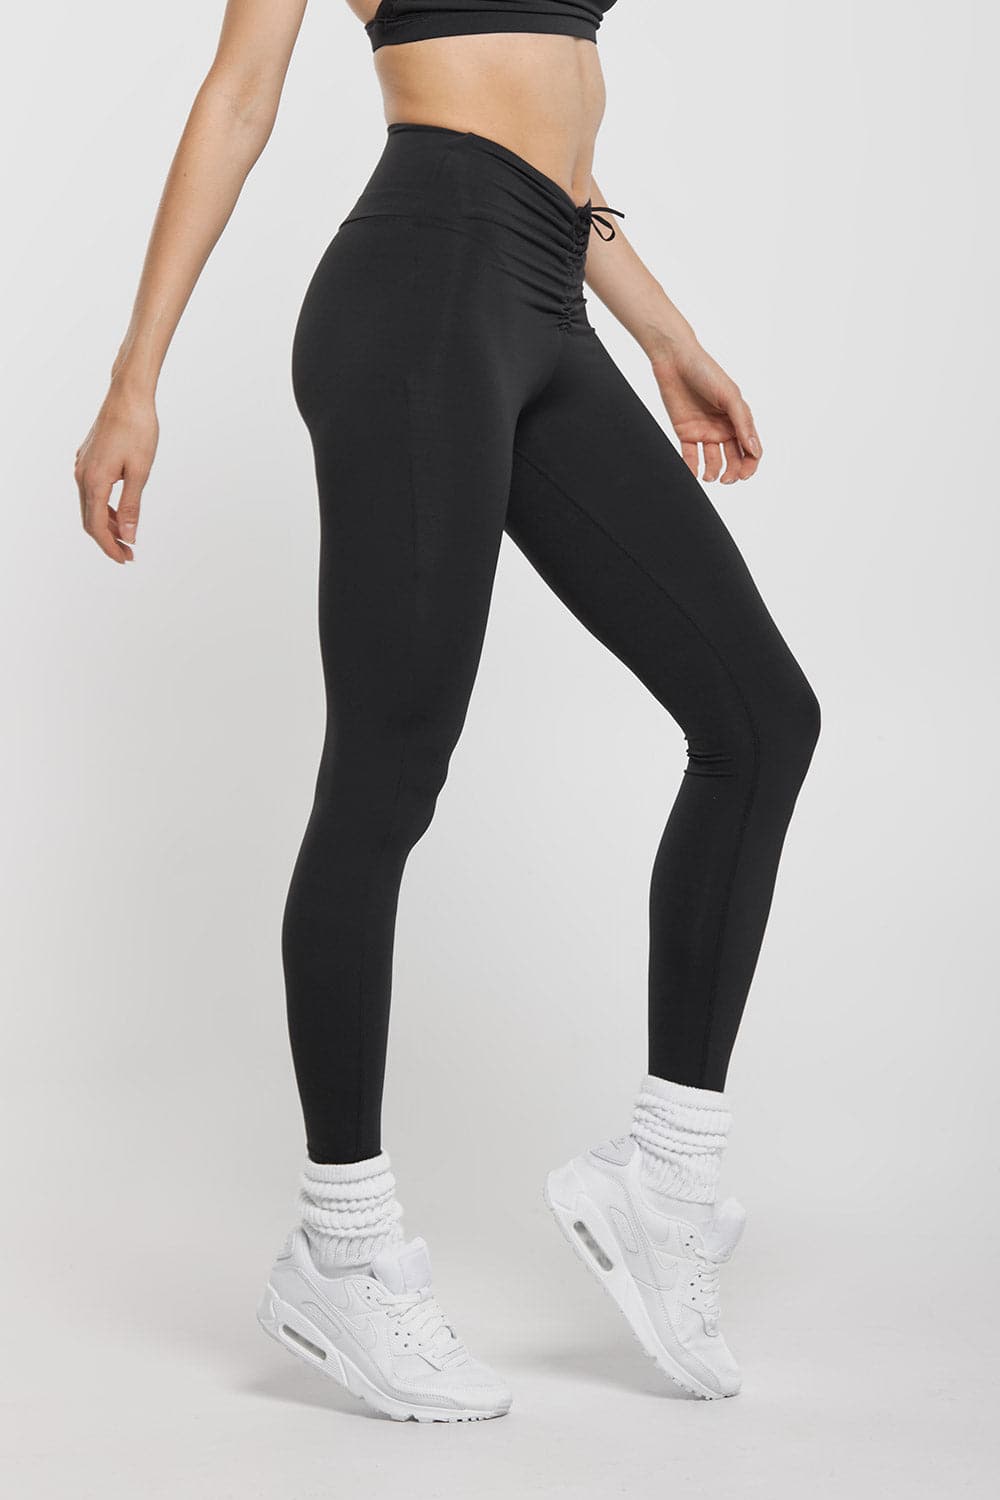 Even Leggings 'Snobs' Say This $14 Amazon Pair Looks Expensive